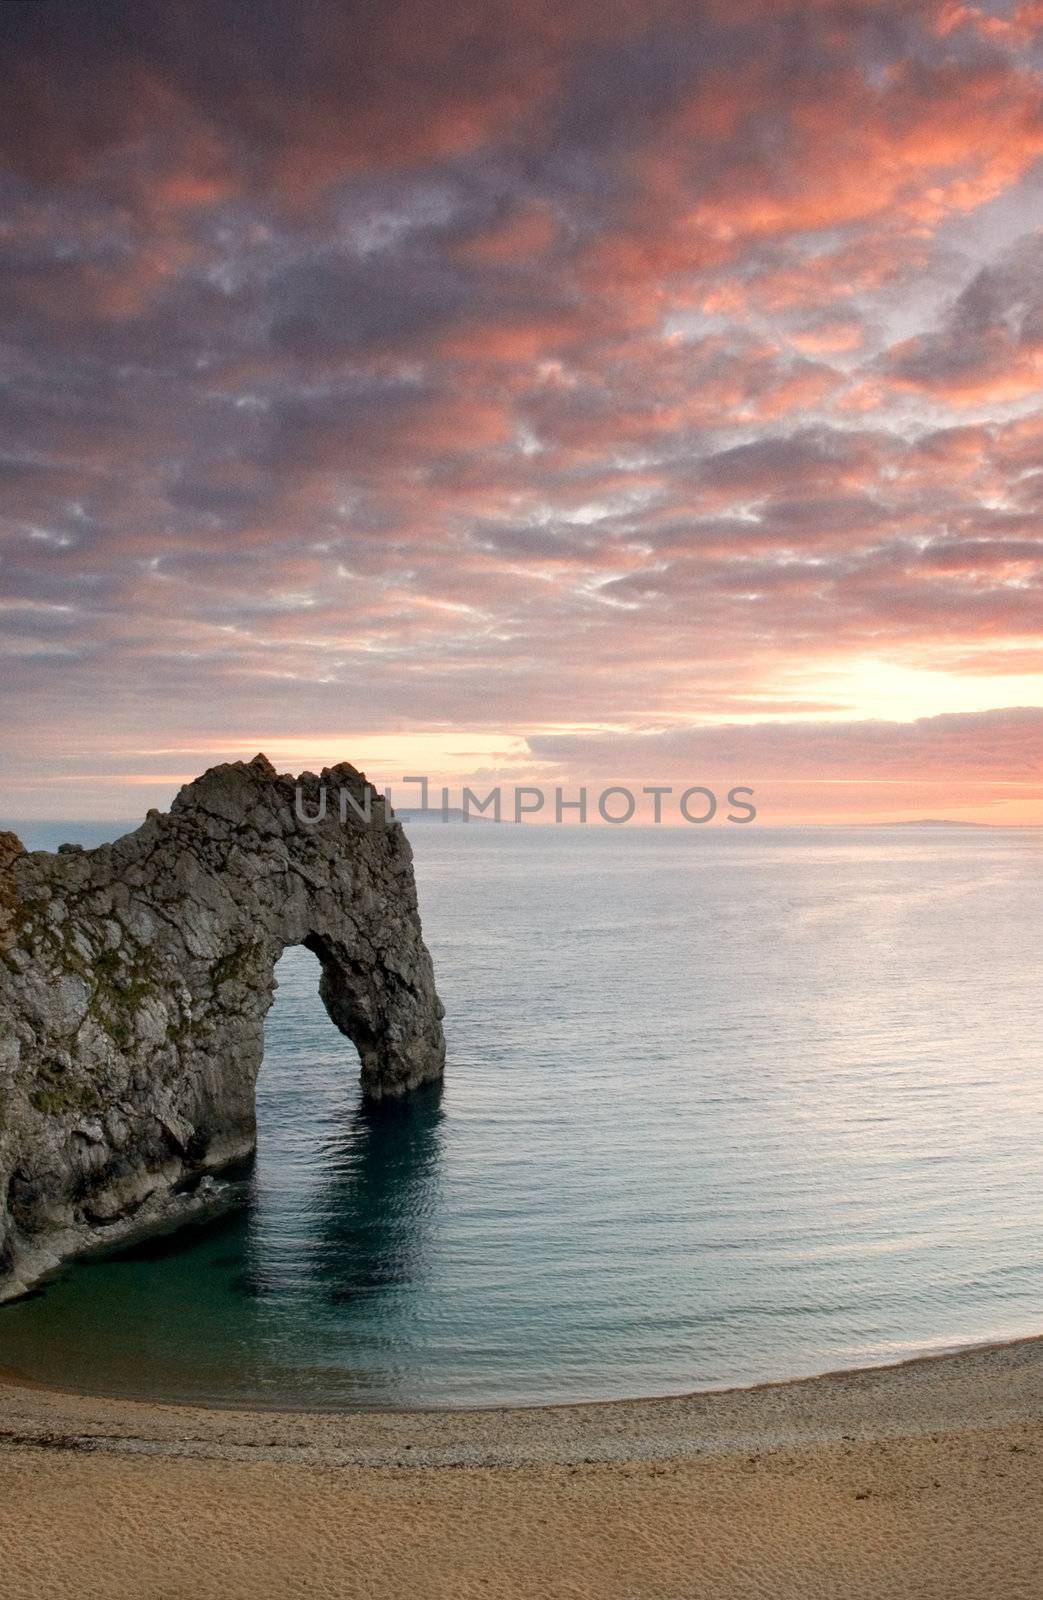 Sunset at the famous rock arch in Dorset